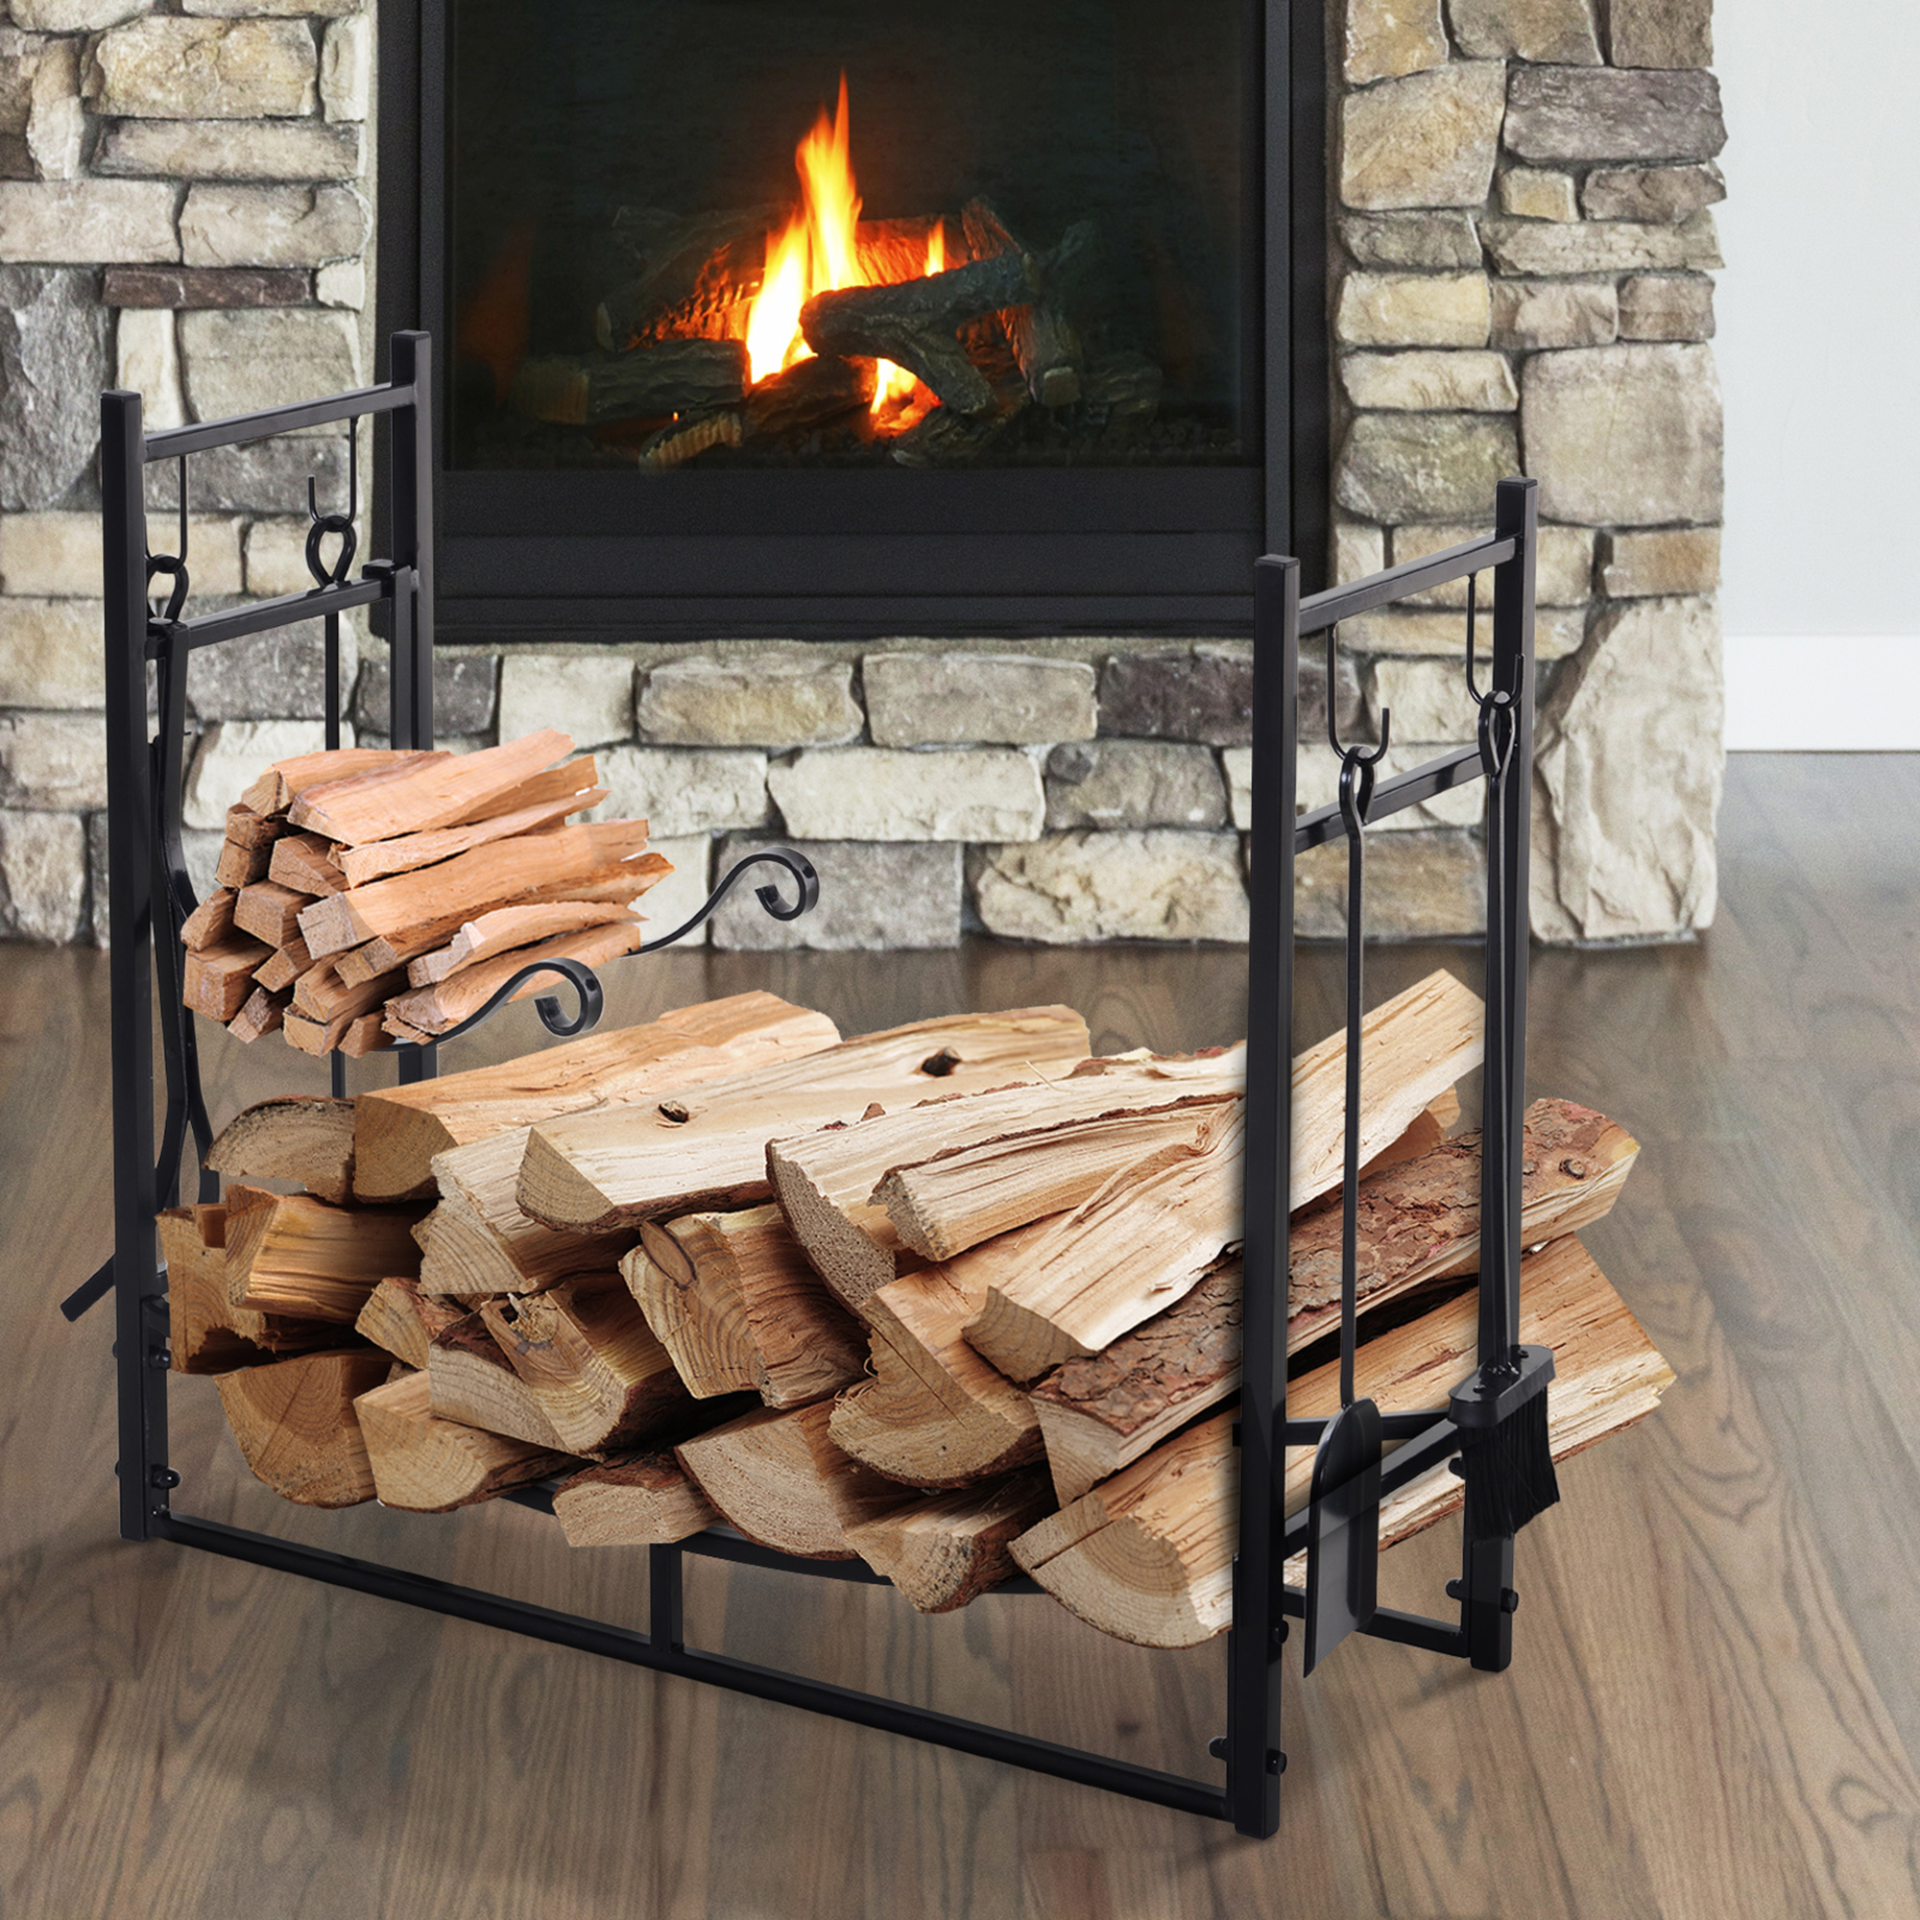 Outsunny Metal Firewood Log Holder Indoor Outdoor Firewood Rack Fireplace 2 Tier Wood Storage Shelf with 4 Tools, Hooks, Scrolls, Black, 84W x 33D x 76H cm